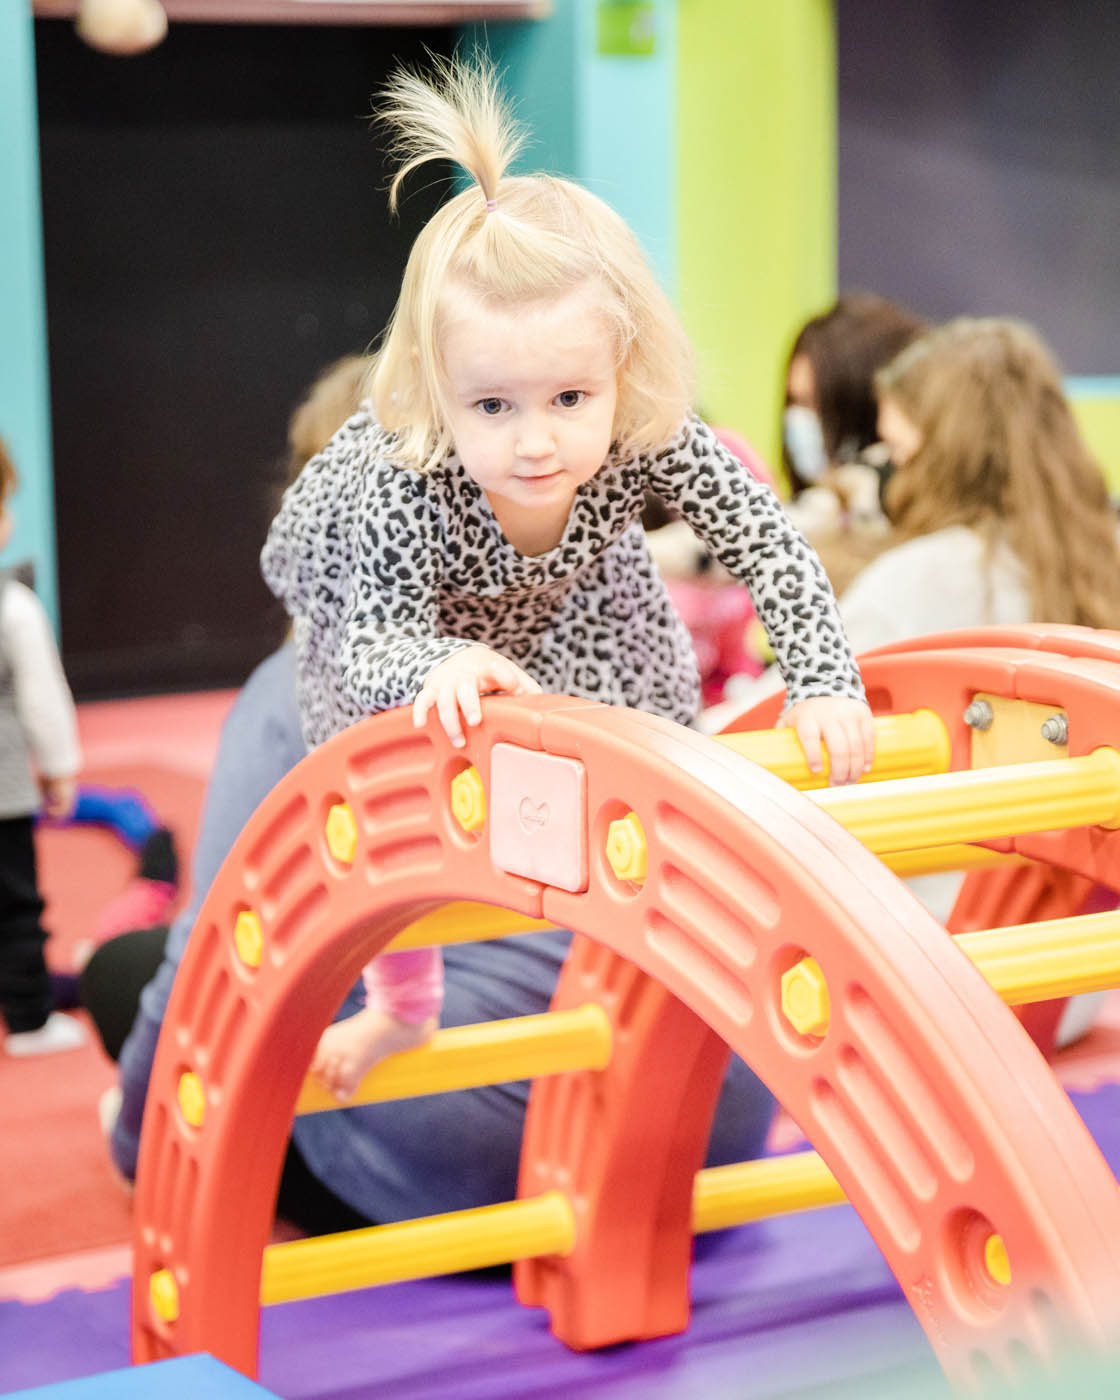 A young girl climbing on our equipment at Romp n' Roll - we are a indoor playground franchise, join us!